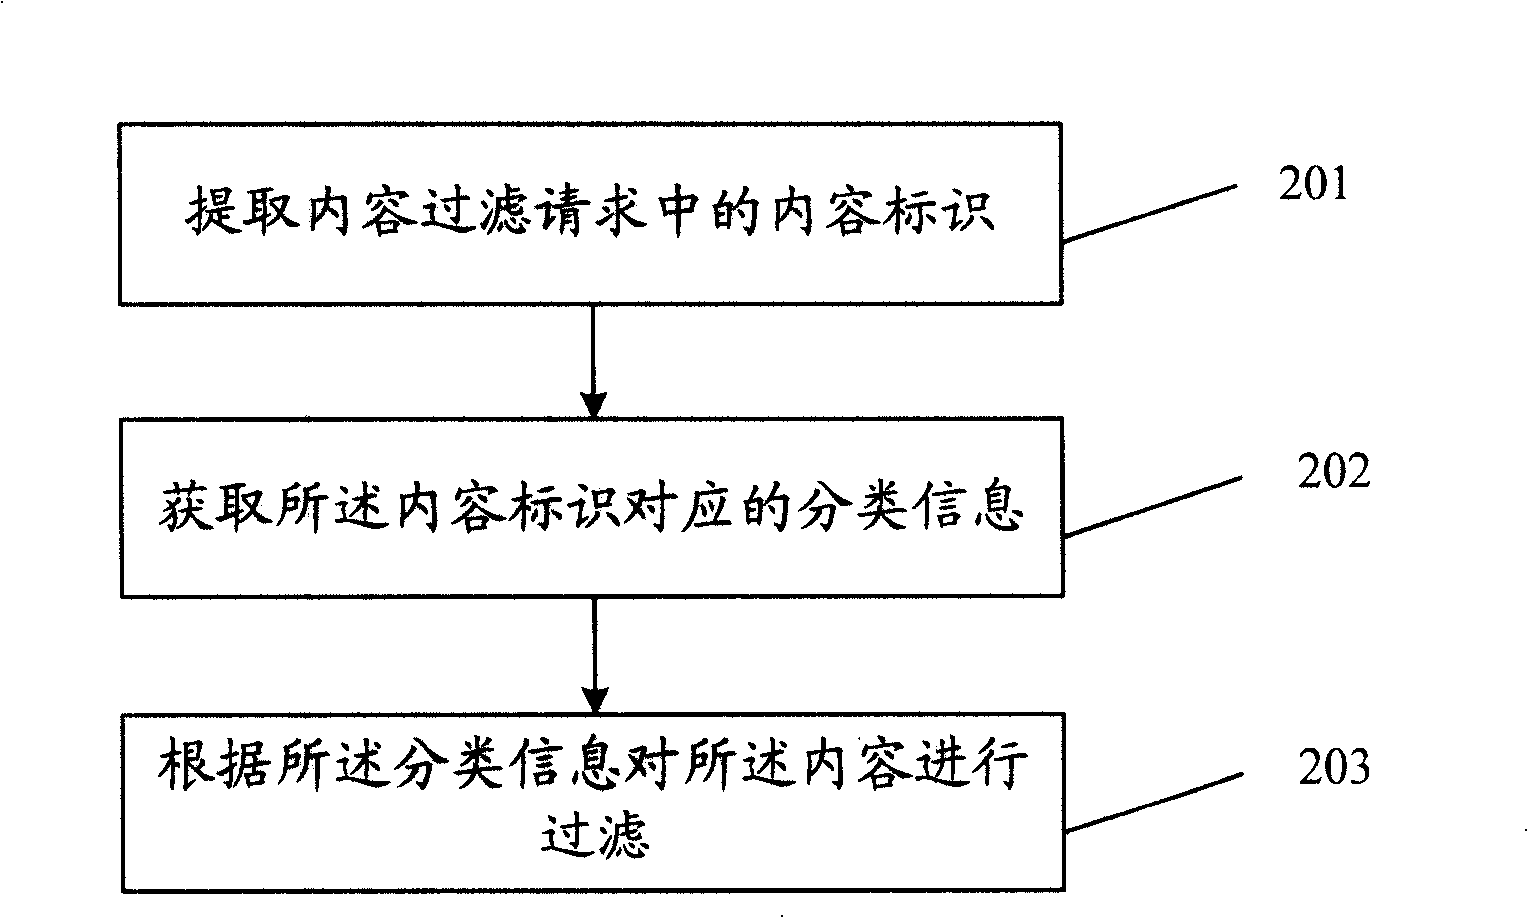 Method and apparatus for filtering content based on classification